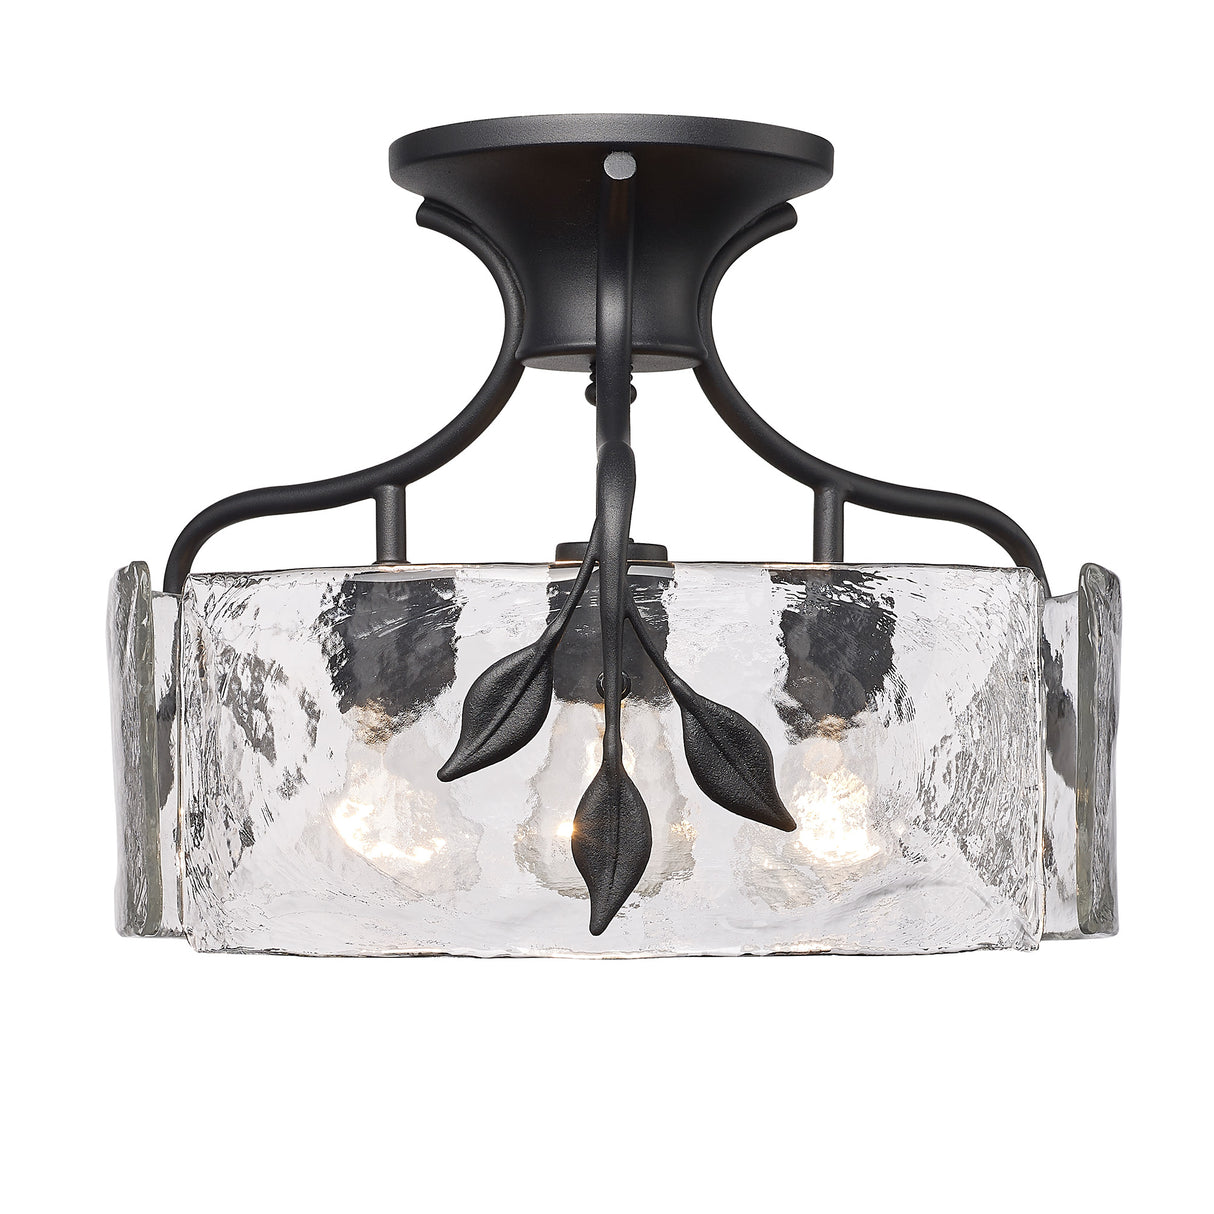 Calla 3 Light Semi-Flush in Natural Black with Hammered Water Glass Shade